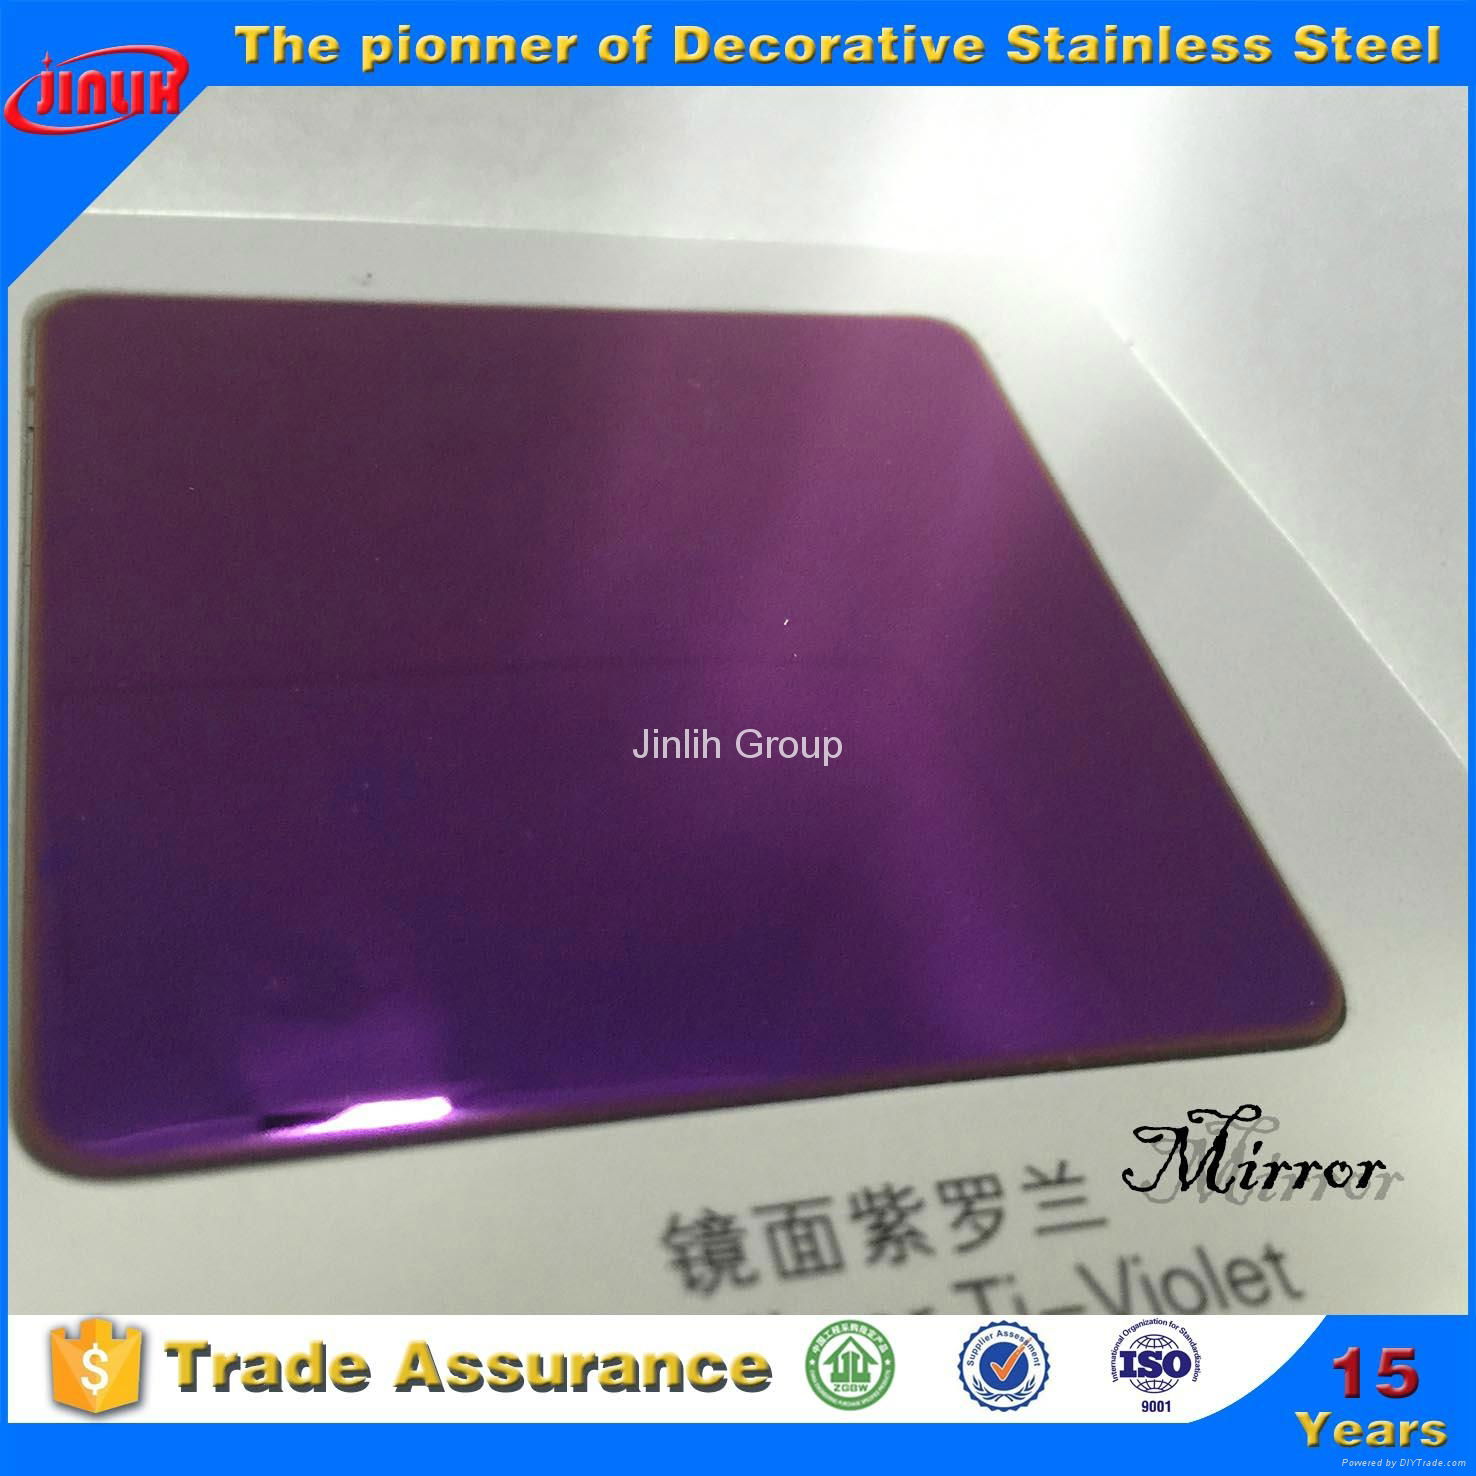 mirror finish stainless steel sheet for decoration  2